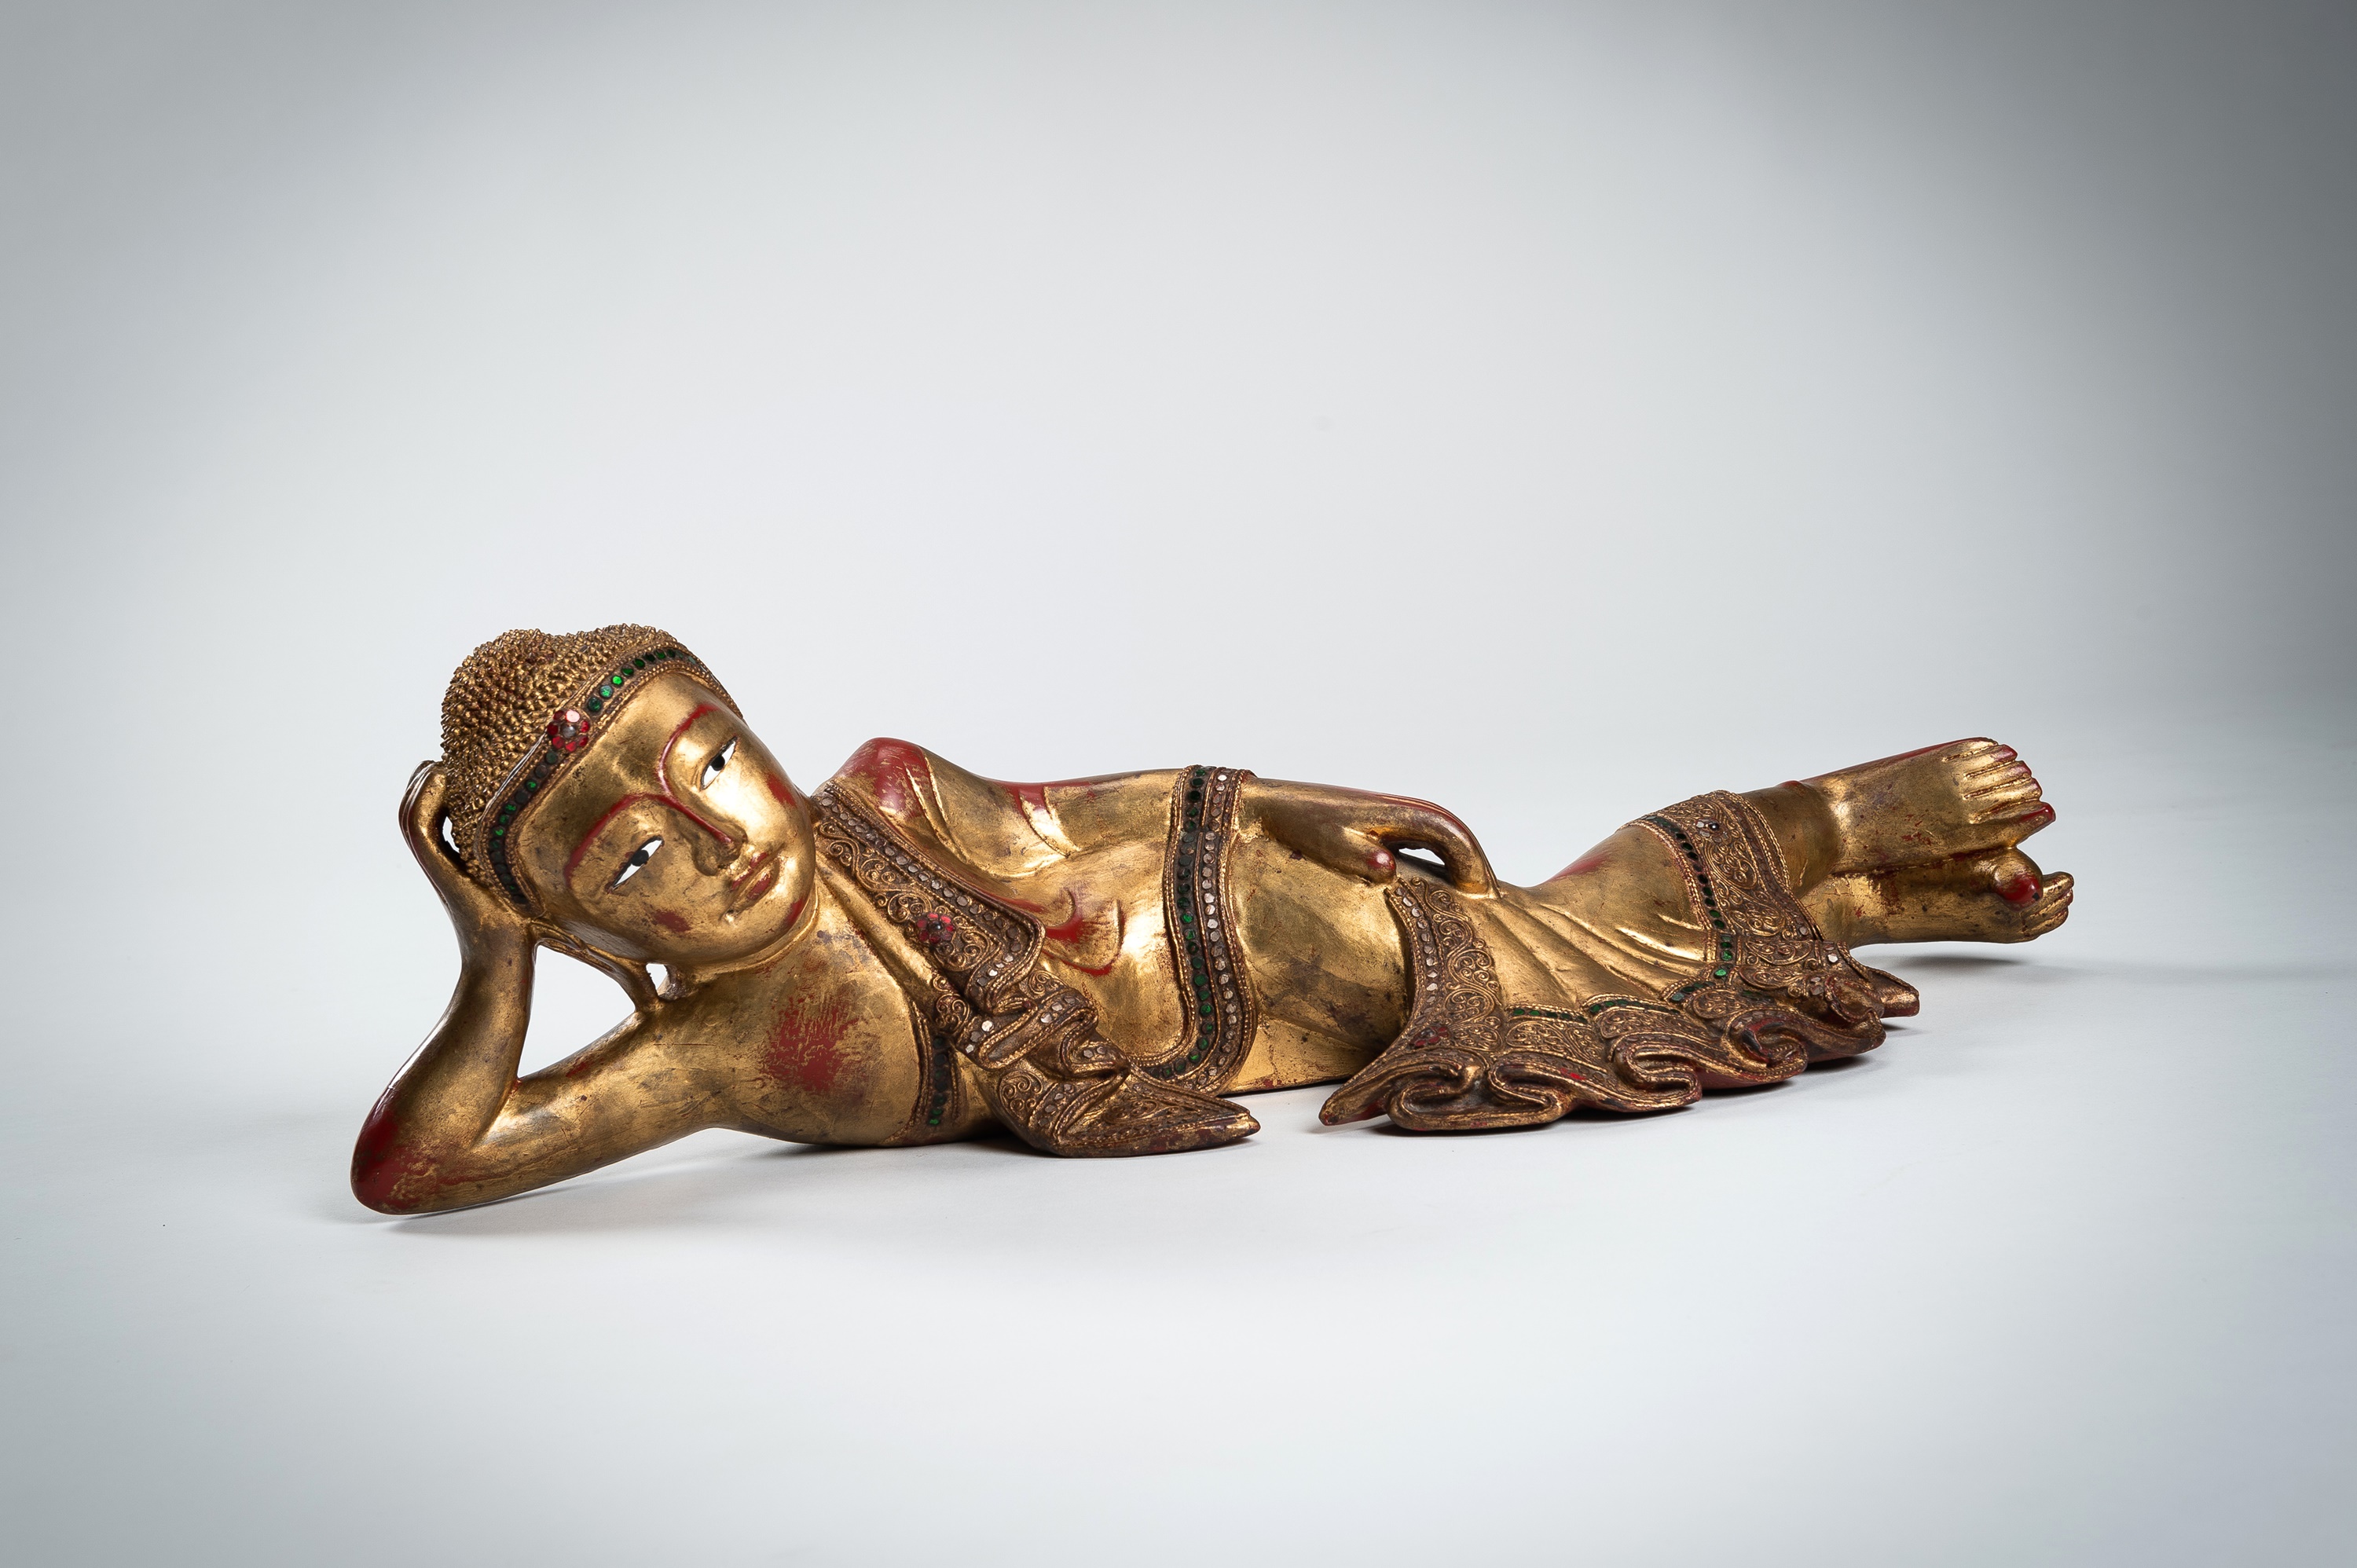 A BURMESE GILT-LACQUERED WOOD FIGURE OF THE RECLINING BUDDHA - Image 7 of 13